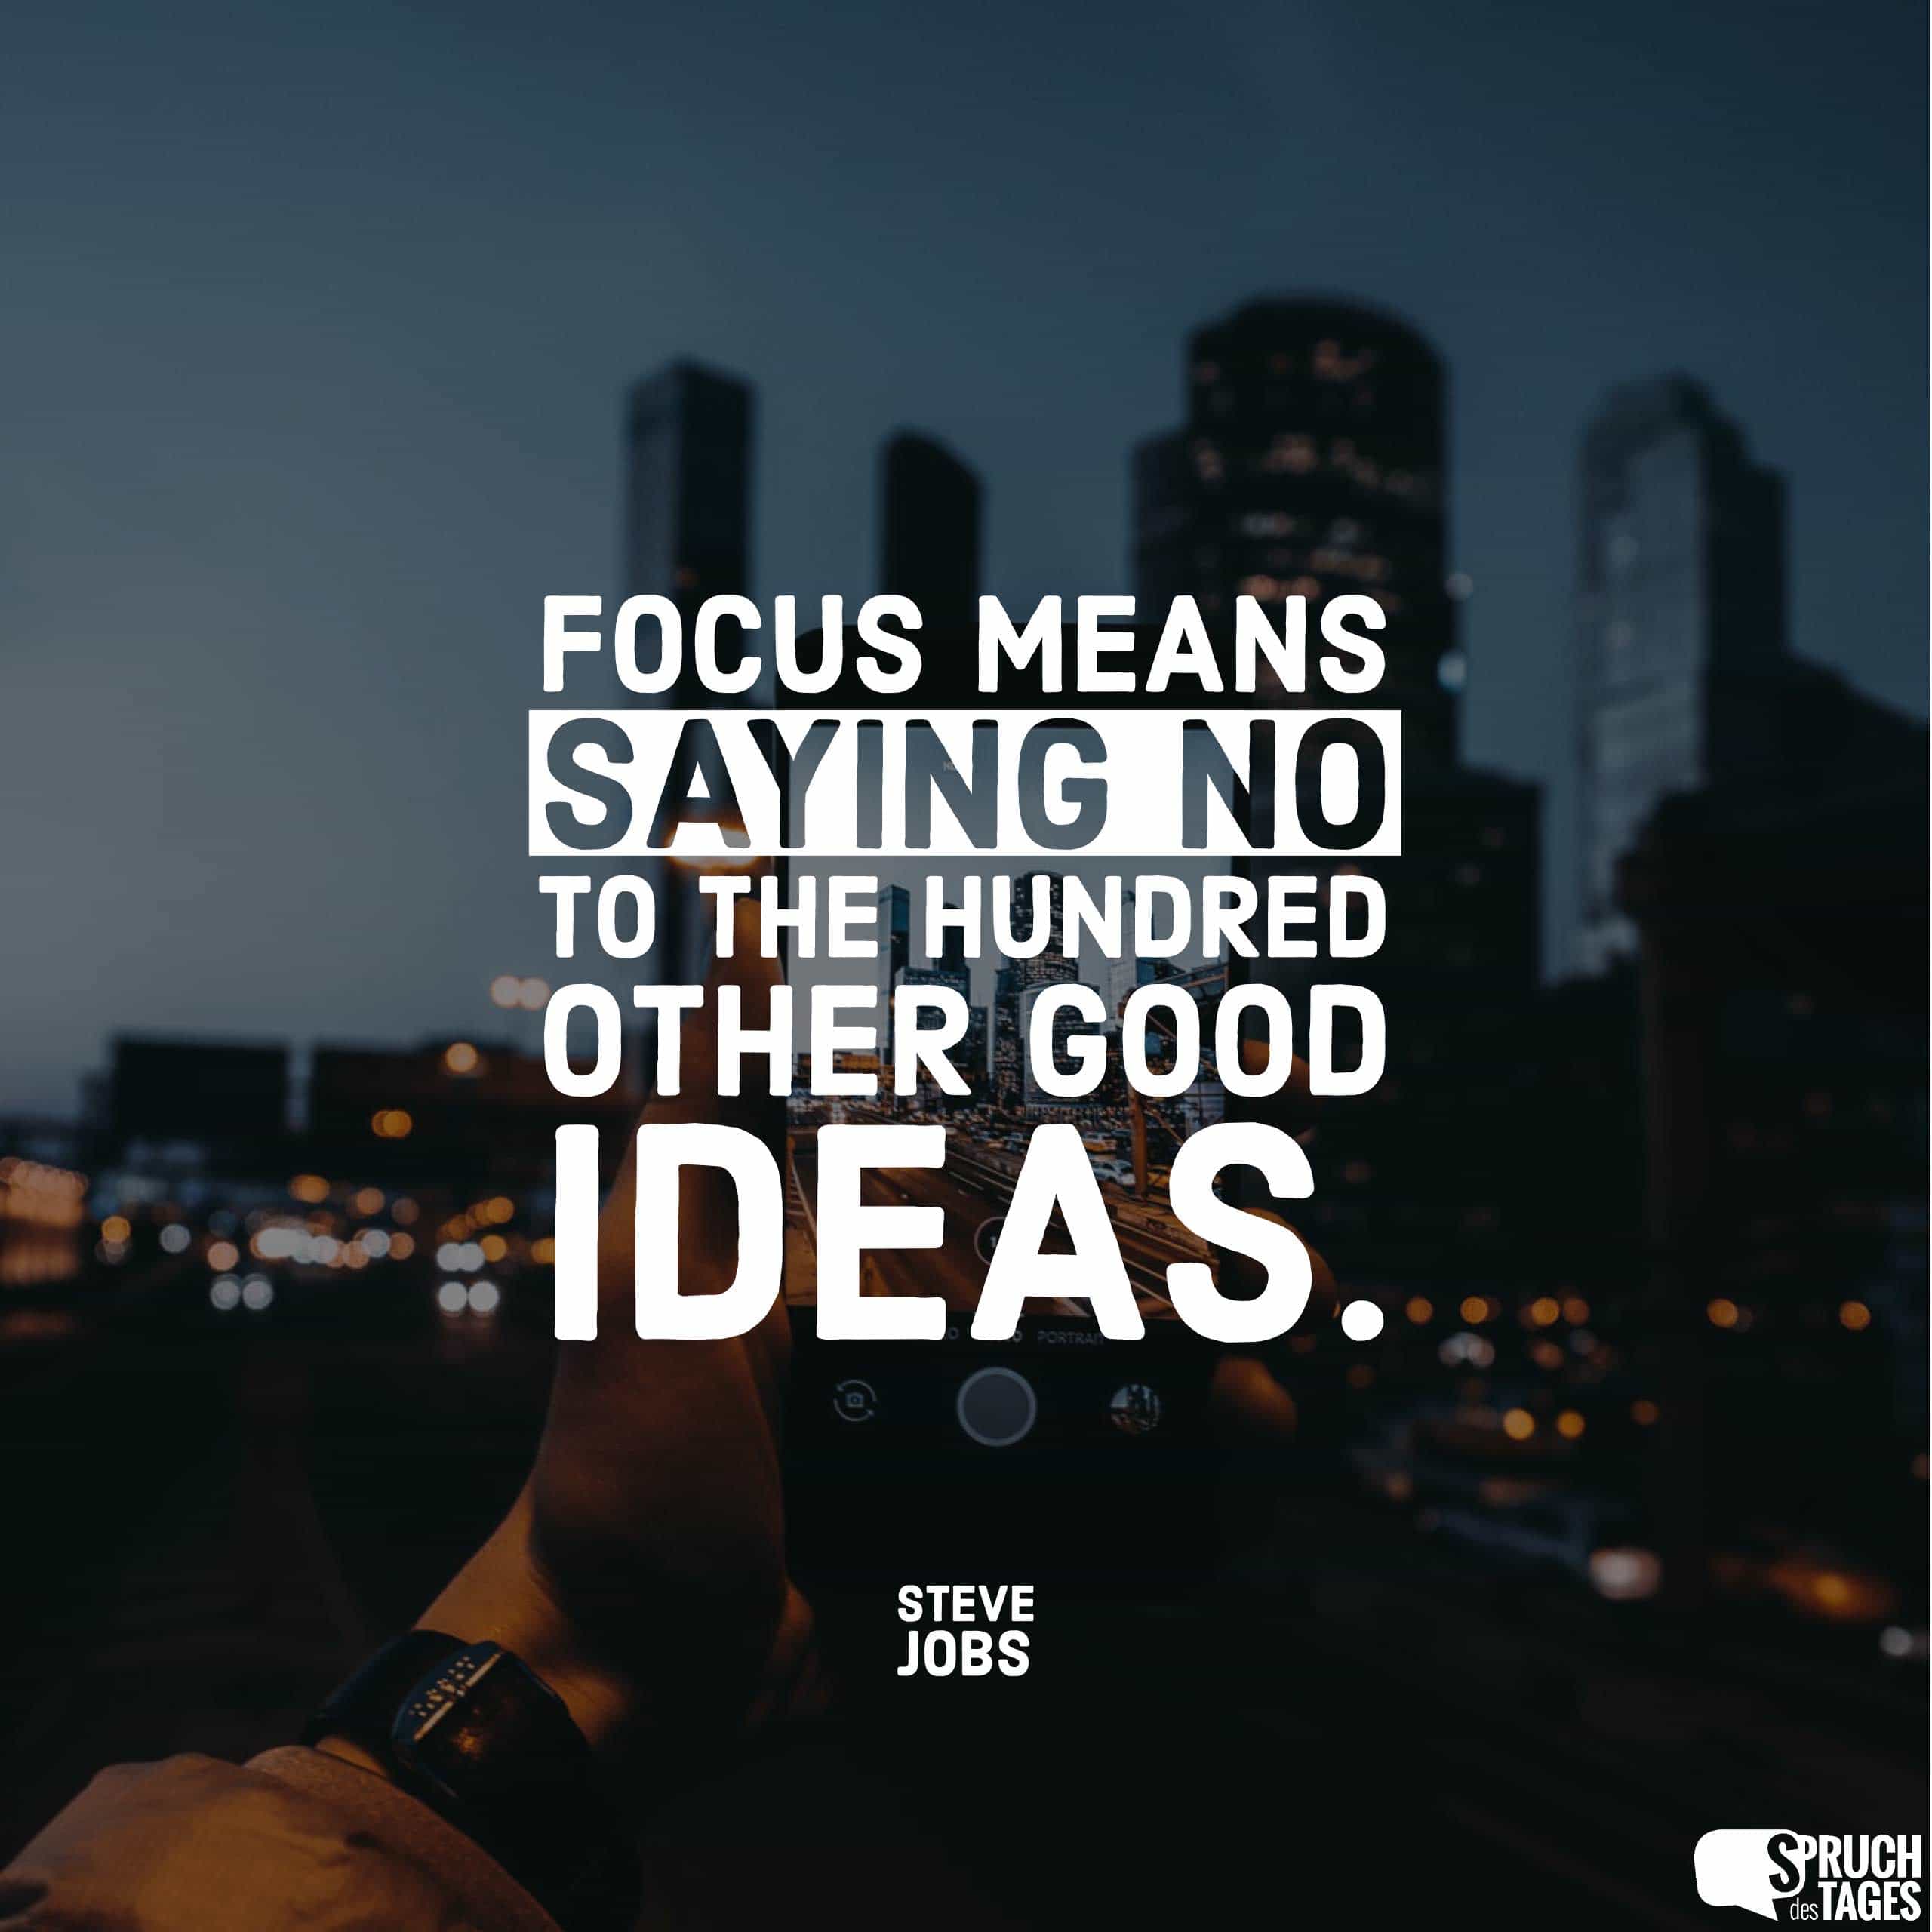 Focus means saying no to the hundred other good ideas.